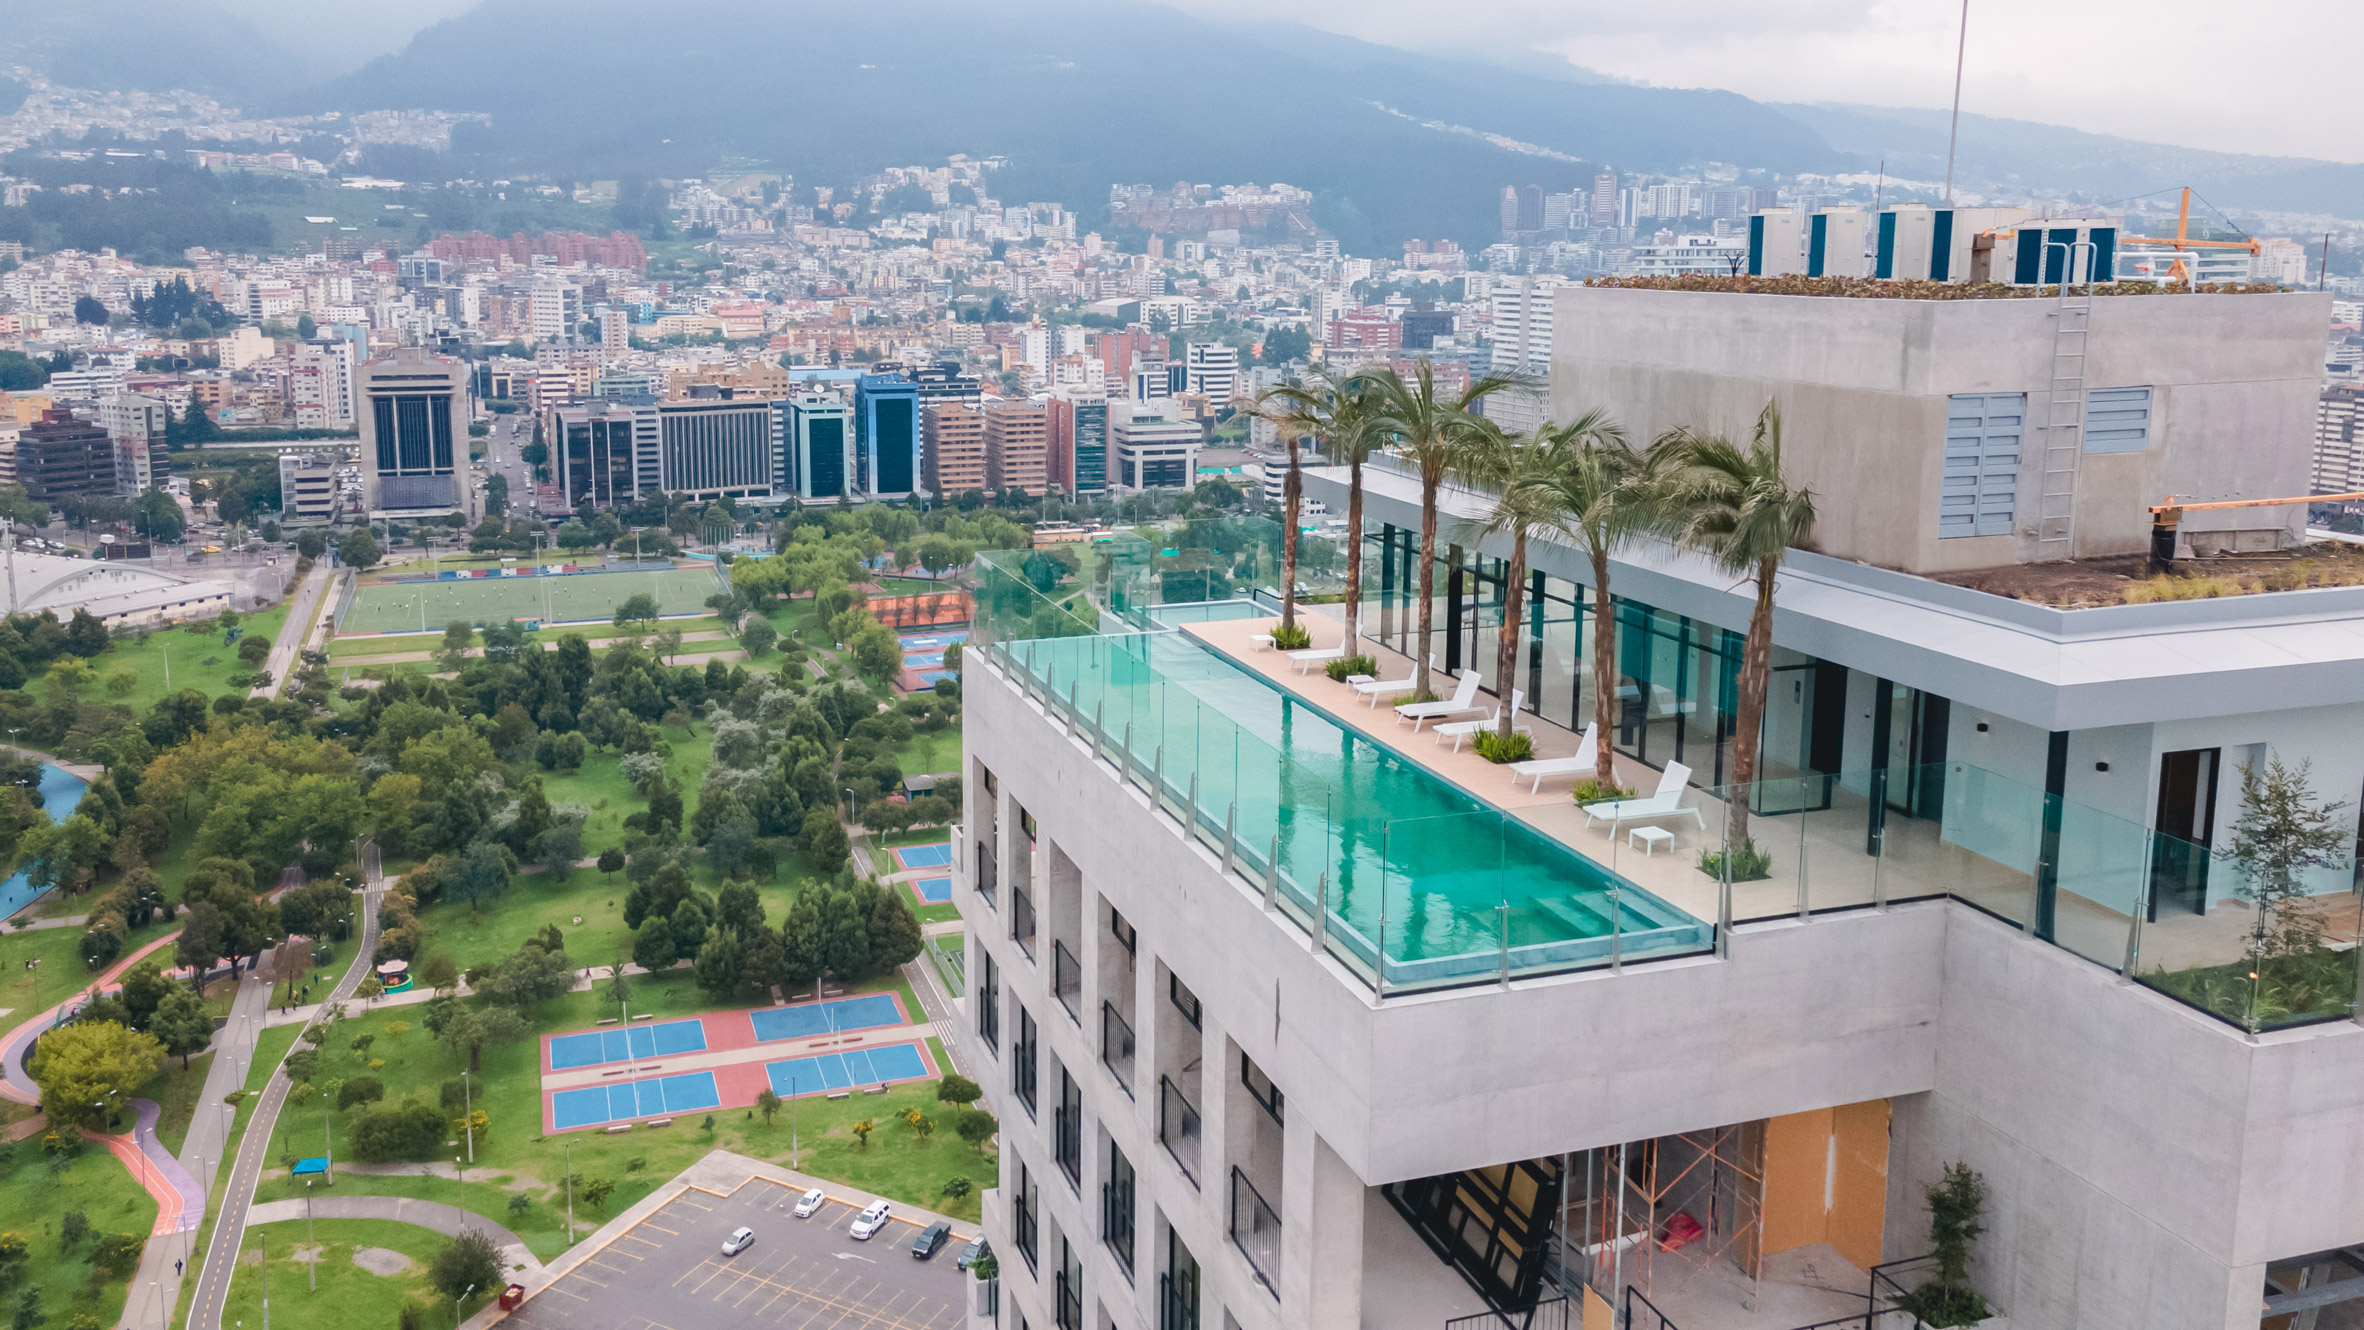 Image of the rooftop pool and surroundings at the Ecuadorian residential tower